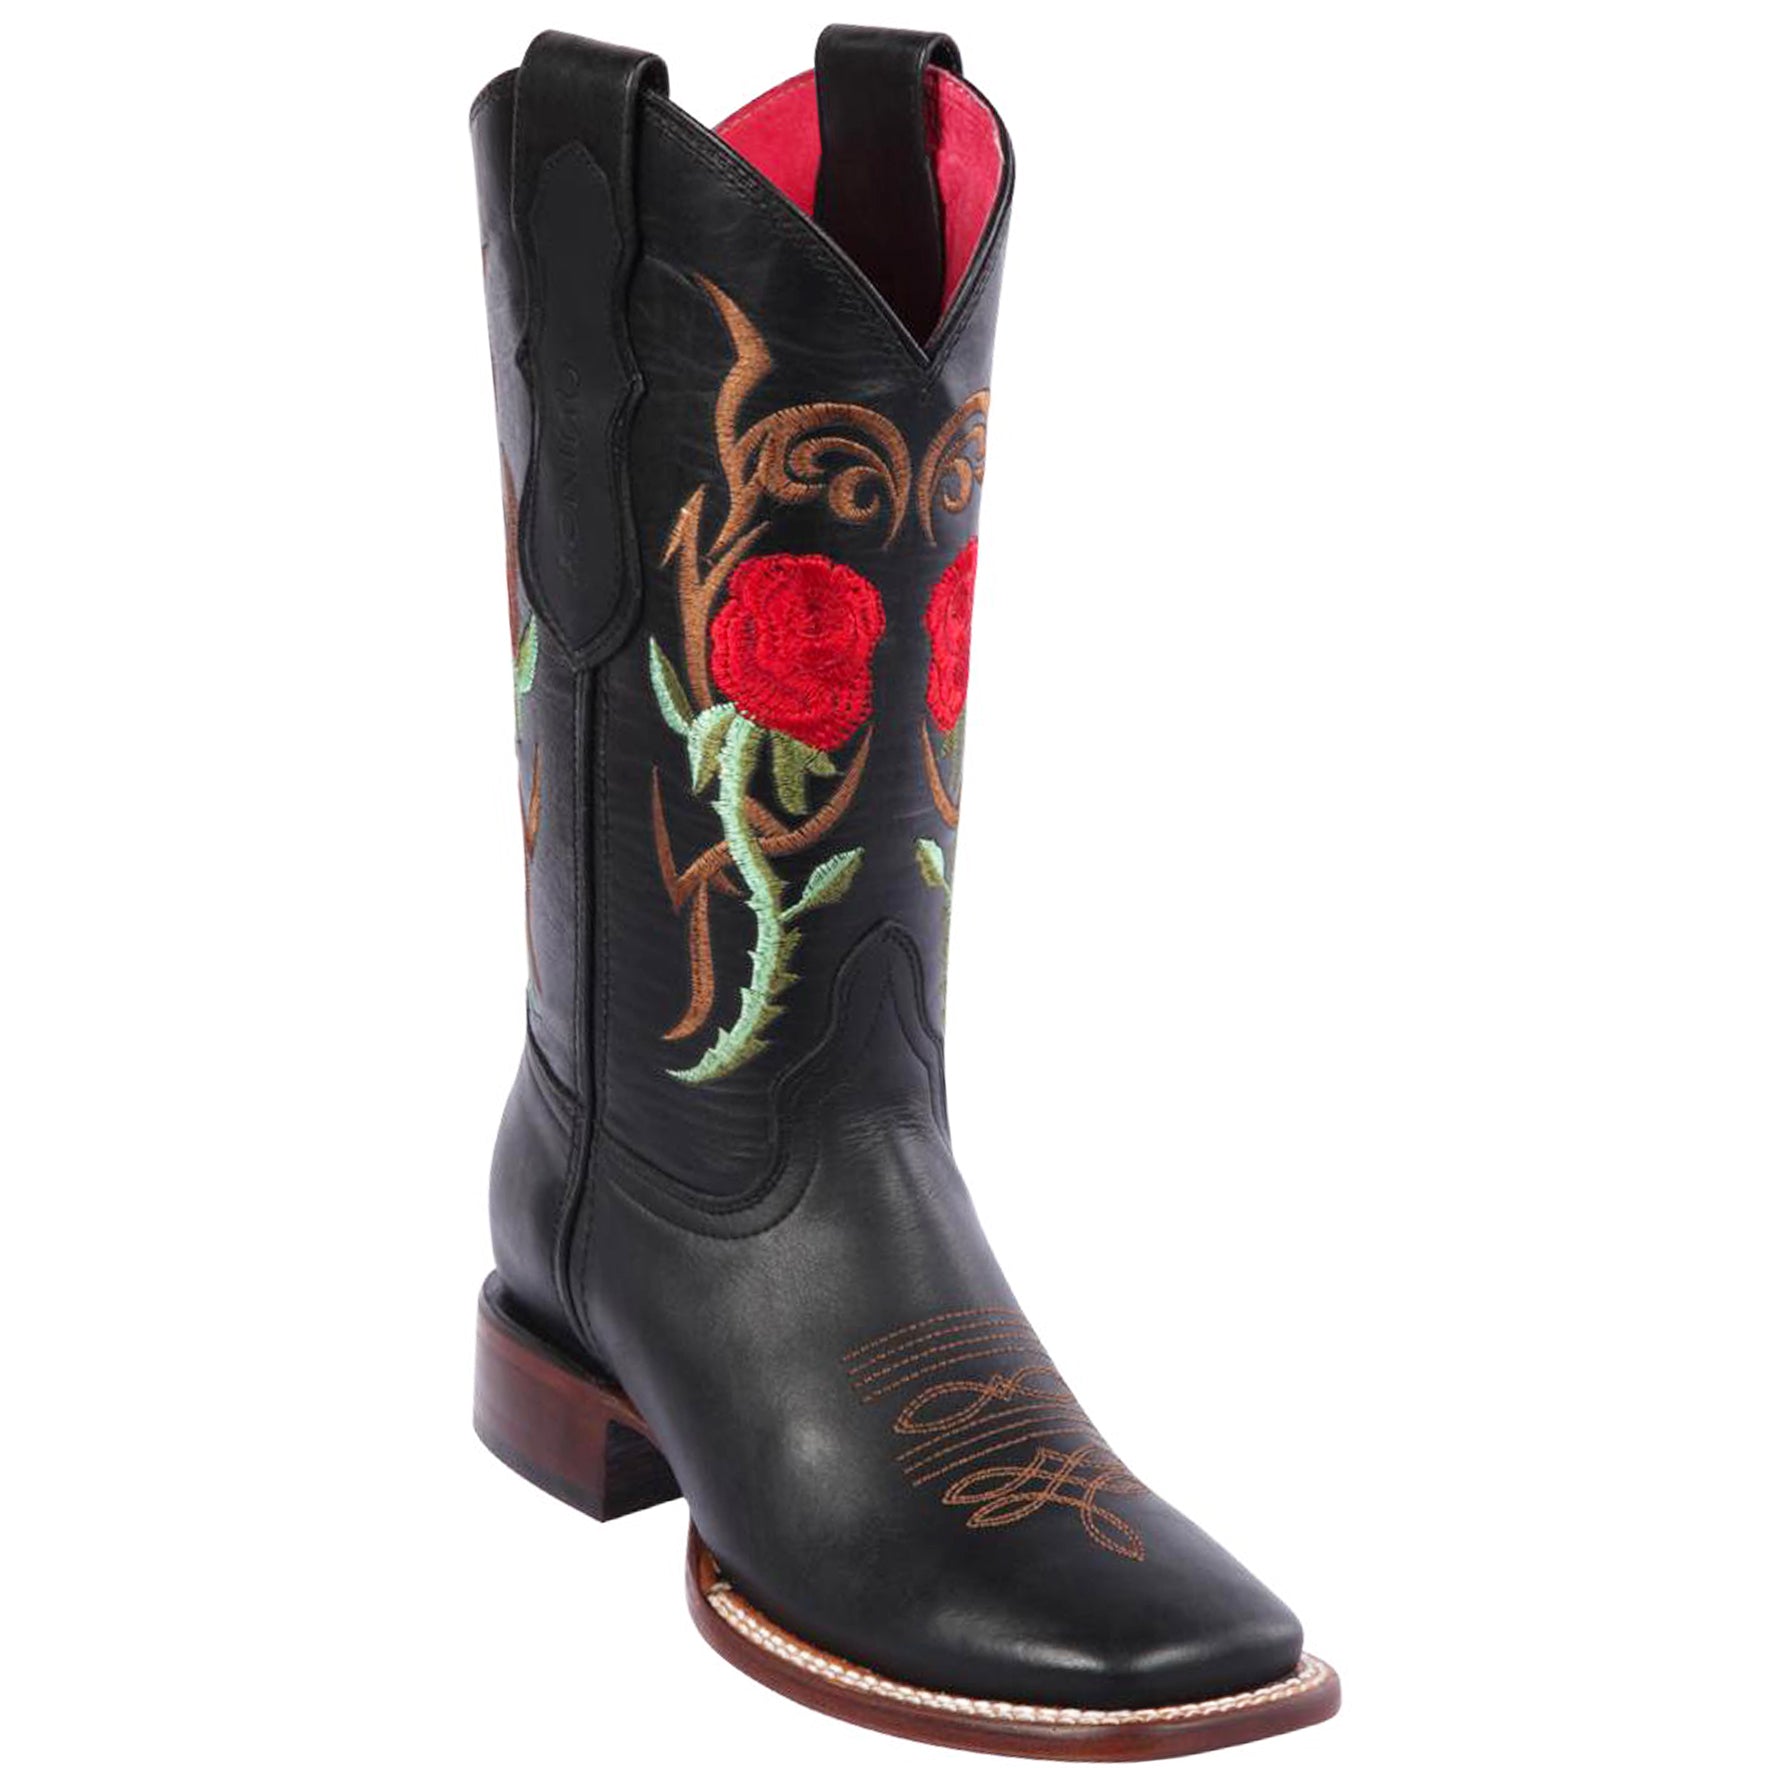 Quincy Red Rose Women's Cowboy Boots